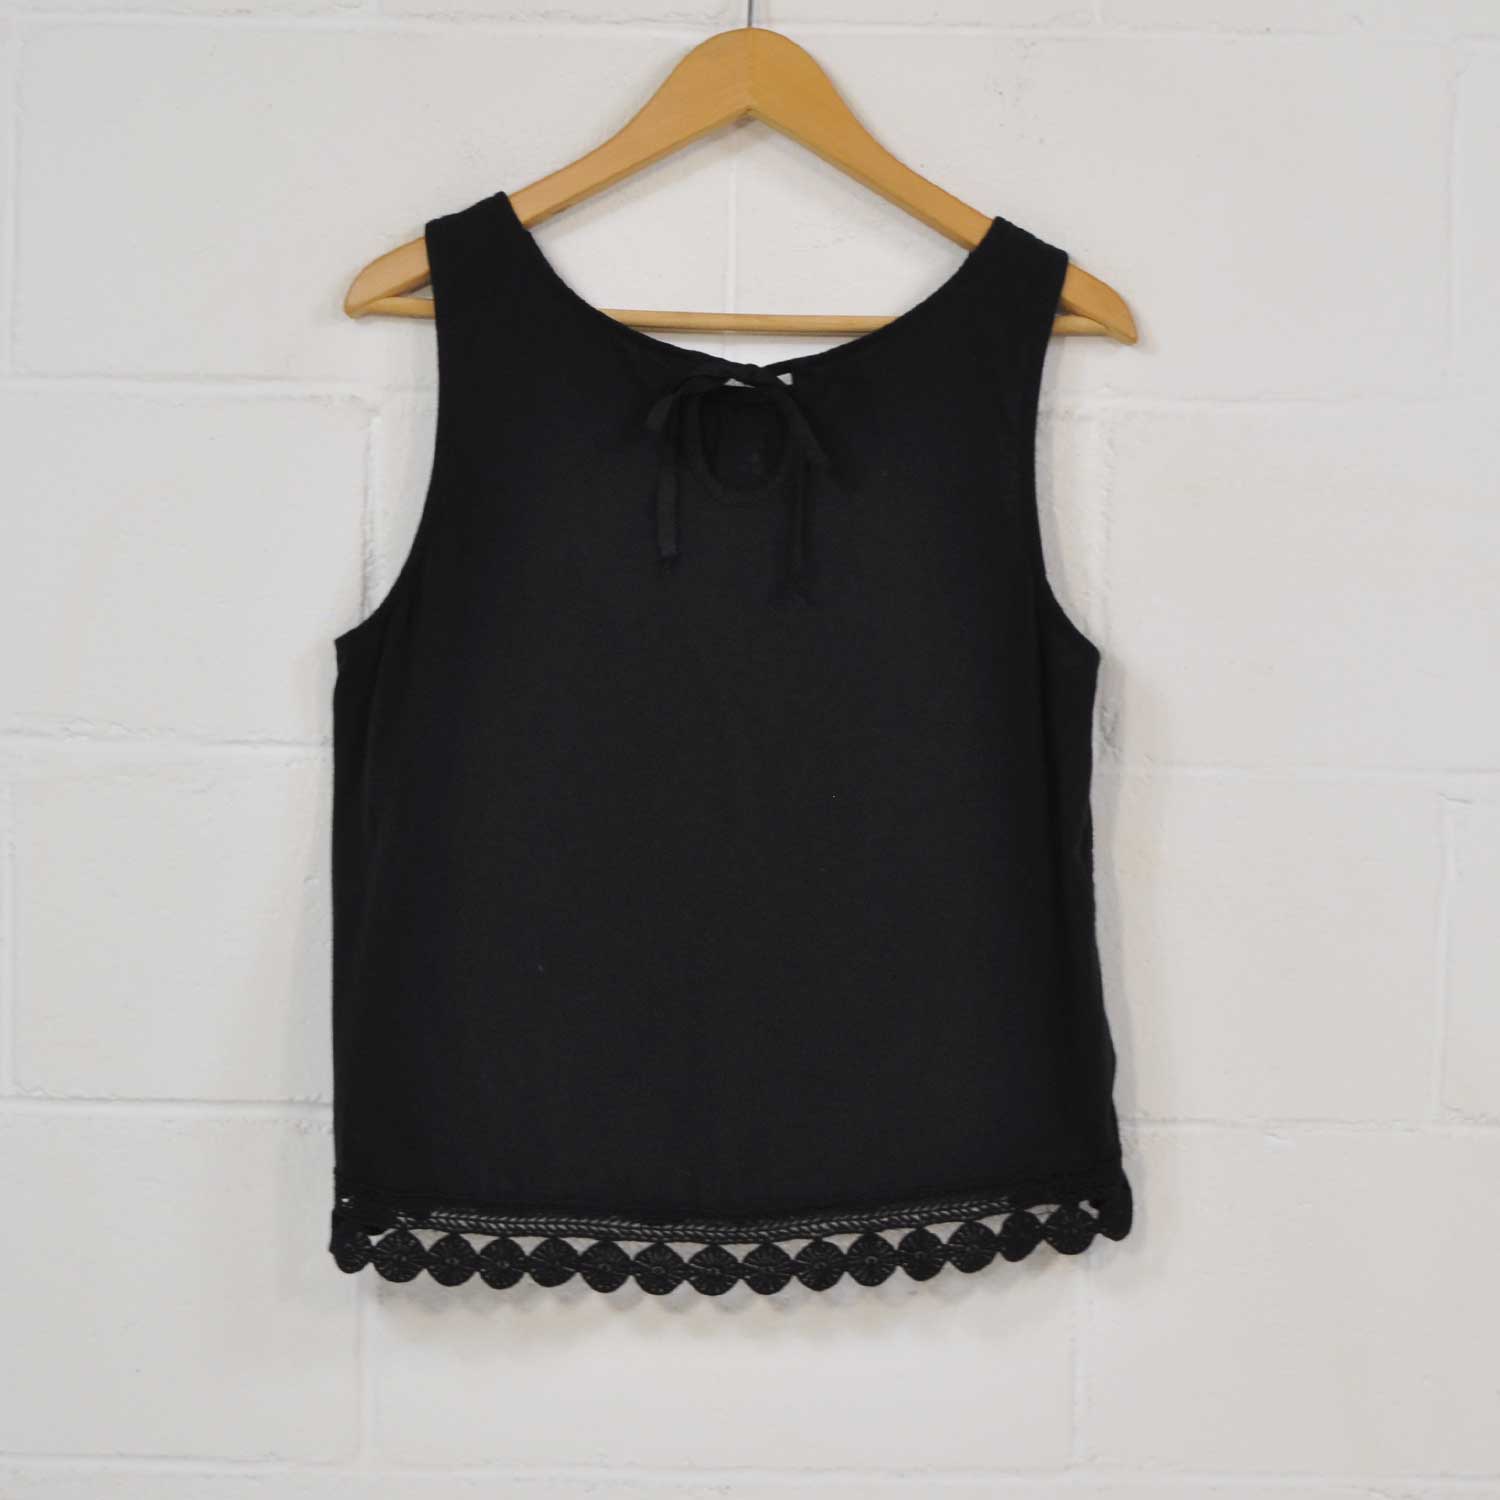 Black embroidered top